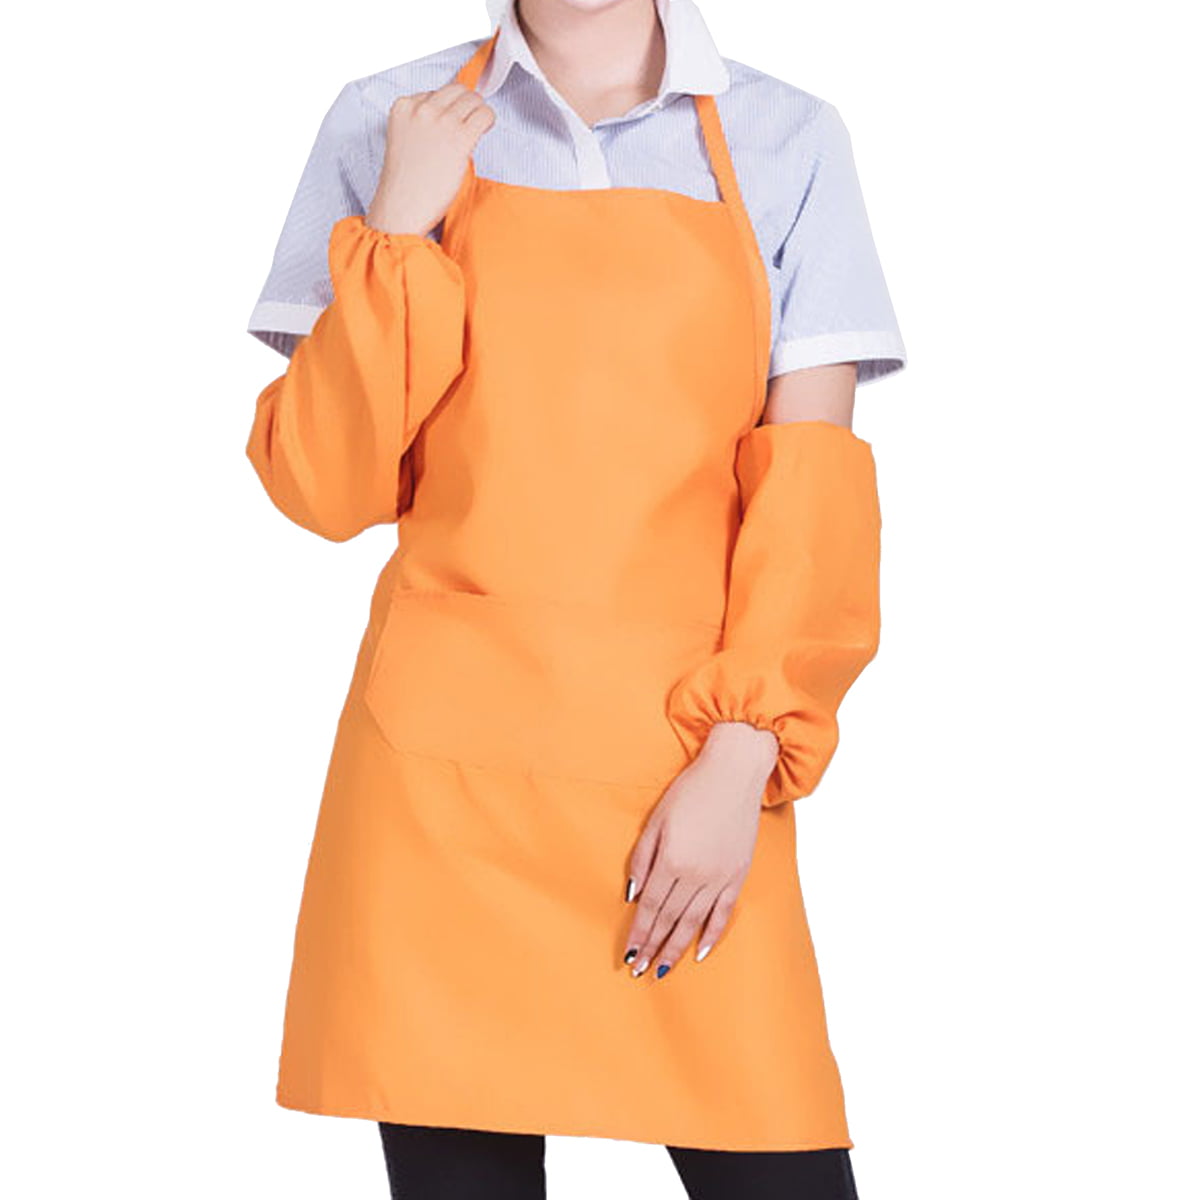 MEN WOMEN TABARD APRON OVERALL KITCHEN CATERING CLEANING BAR PLUS SIZE POCKET 